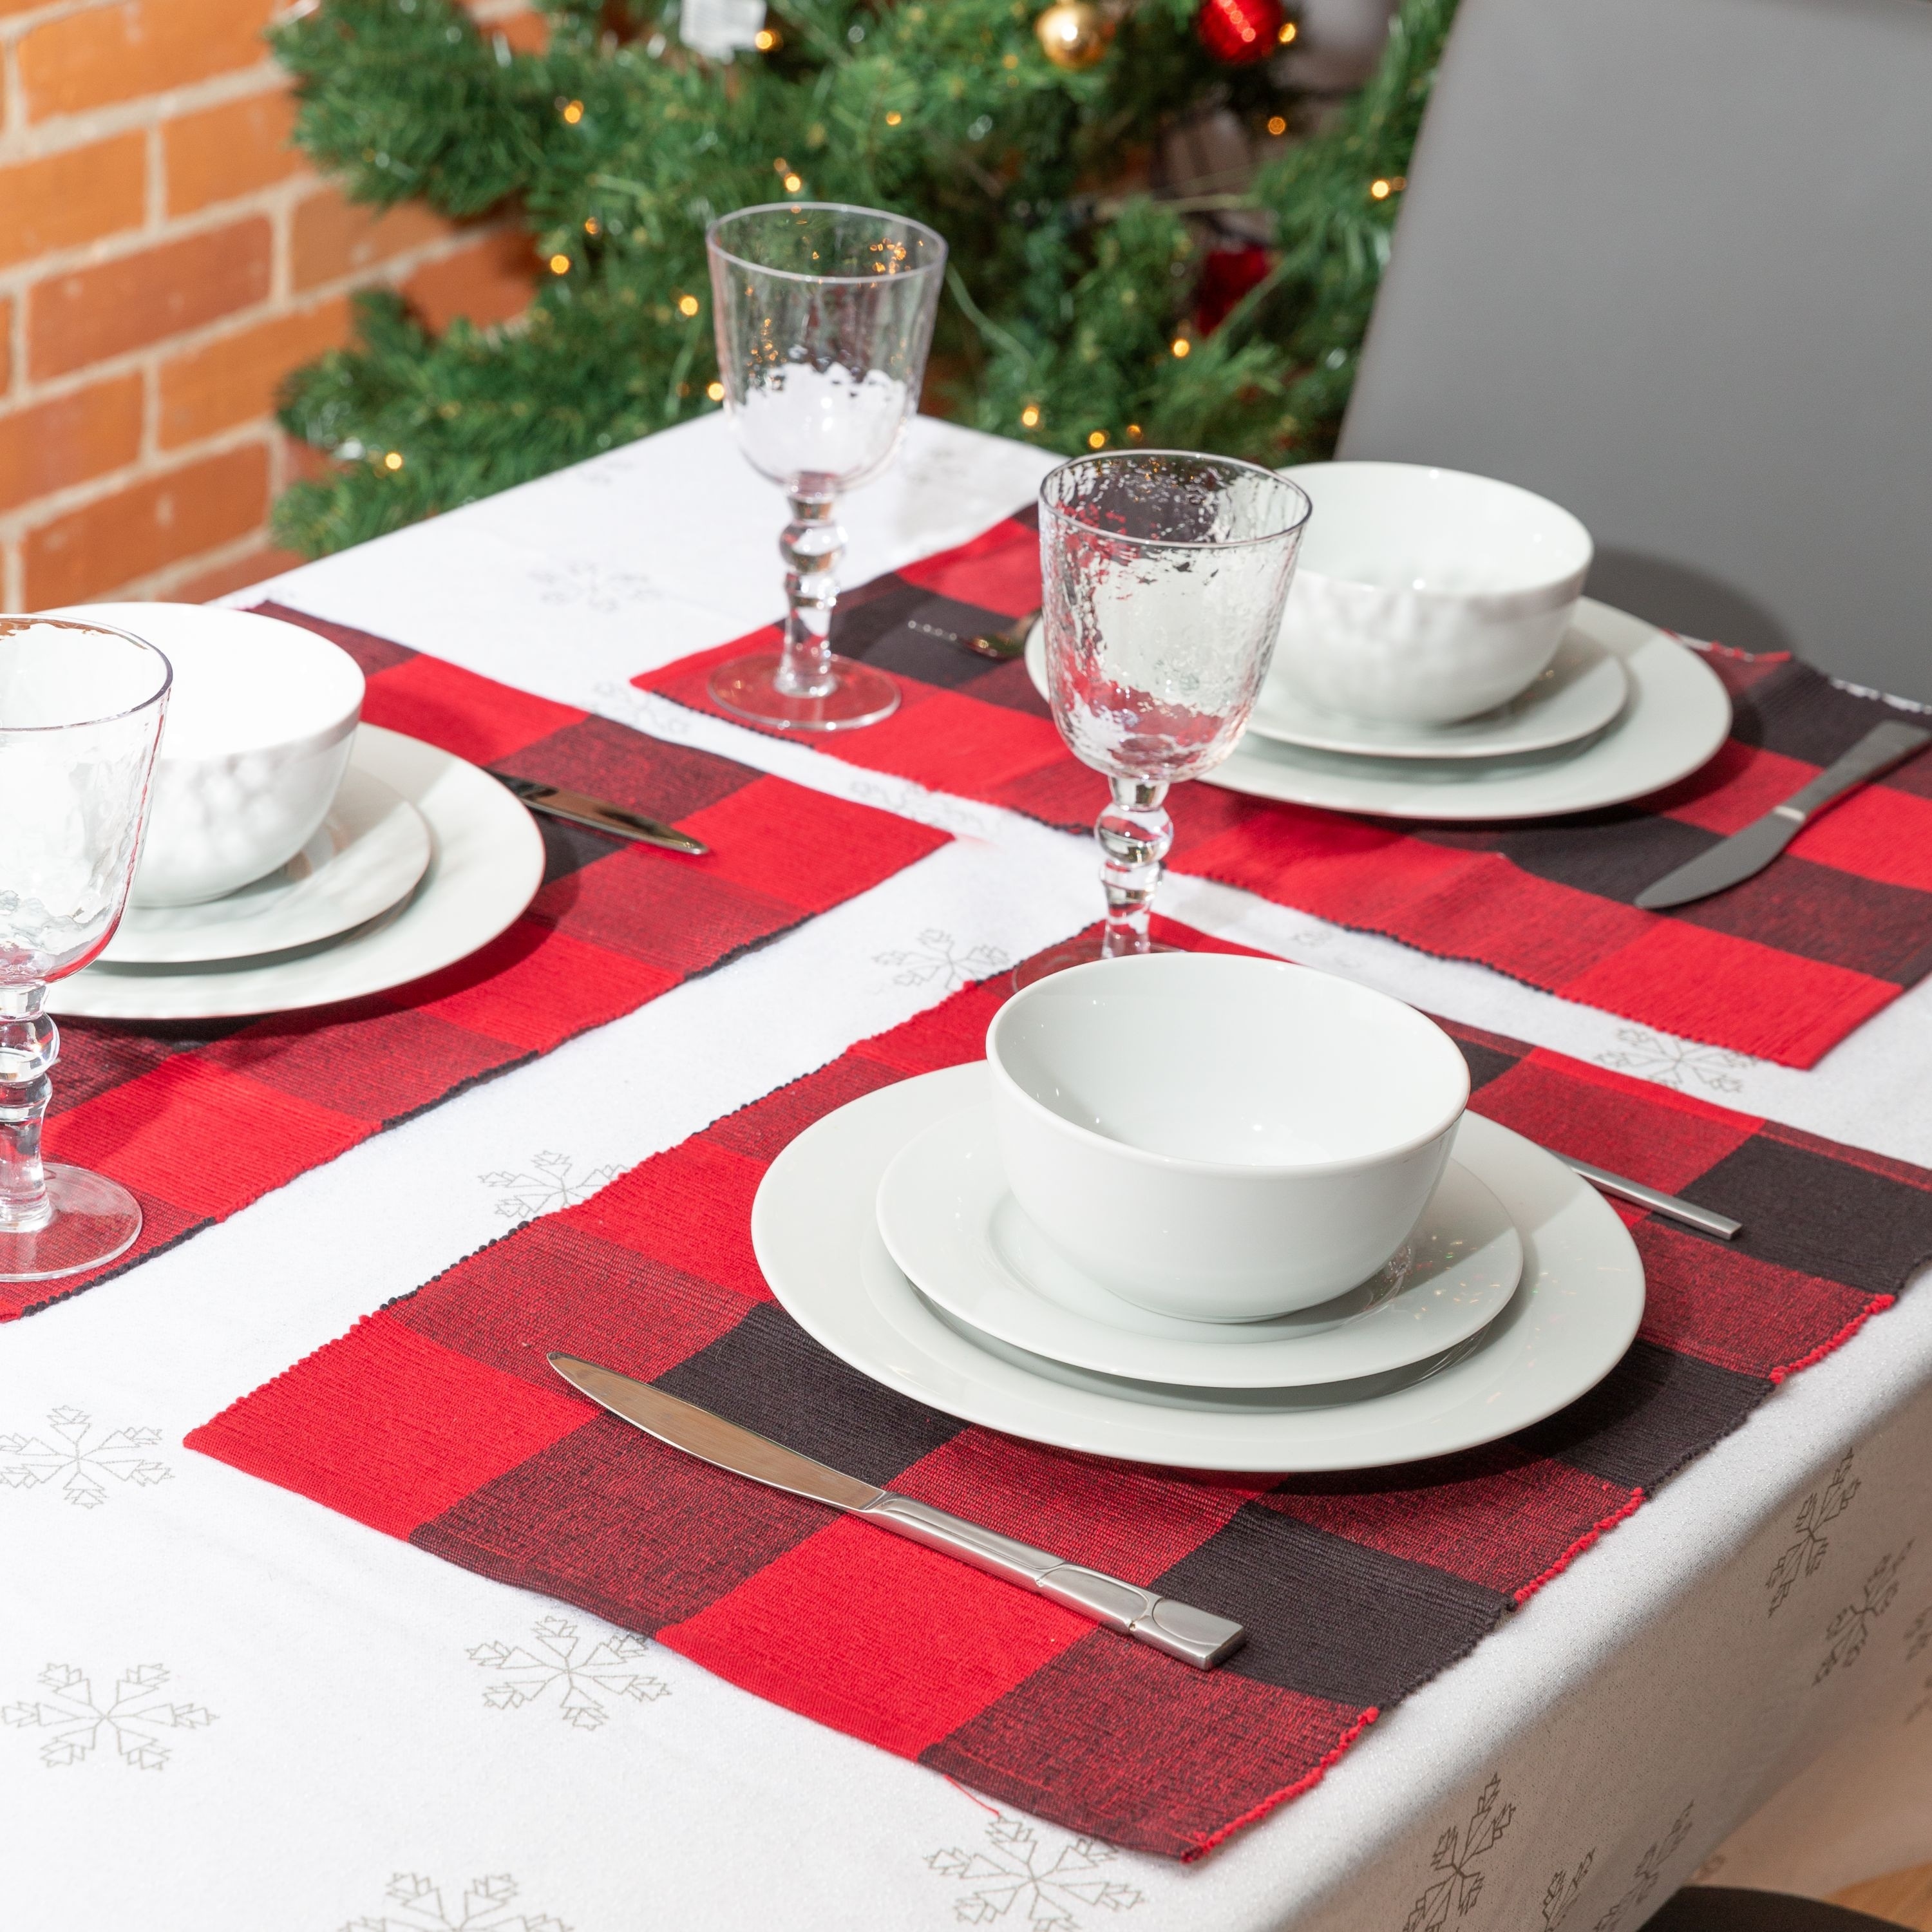 https://ak1.ostkcdn.com/images/products/is/images/direct/c5dbd97e28e2e931b31b1a91c34968e63314e39c/Fabstyles-Buffalo-Check-Cotton-Placemats-Set-of-4.jpg